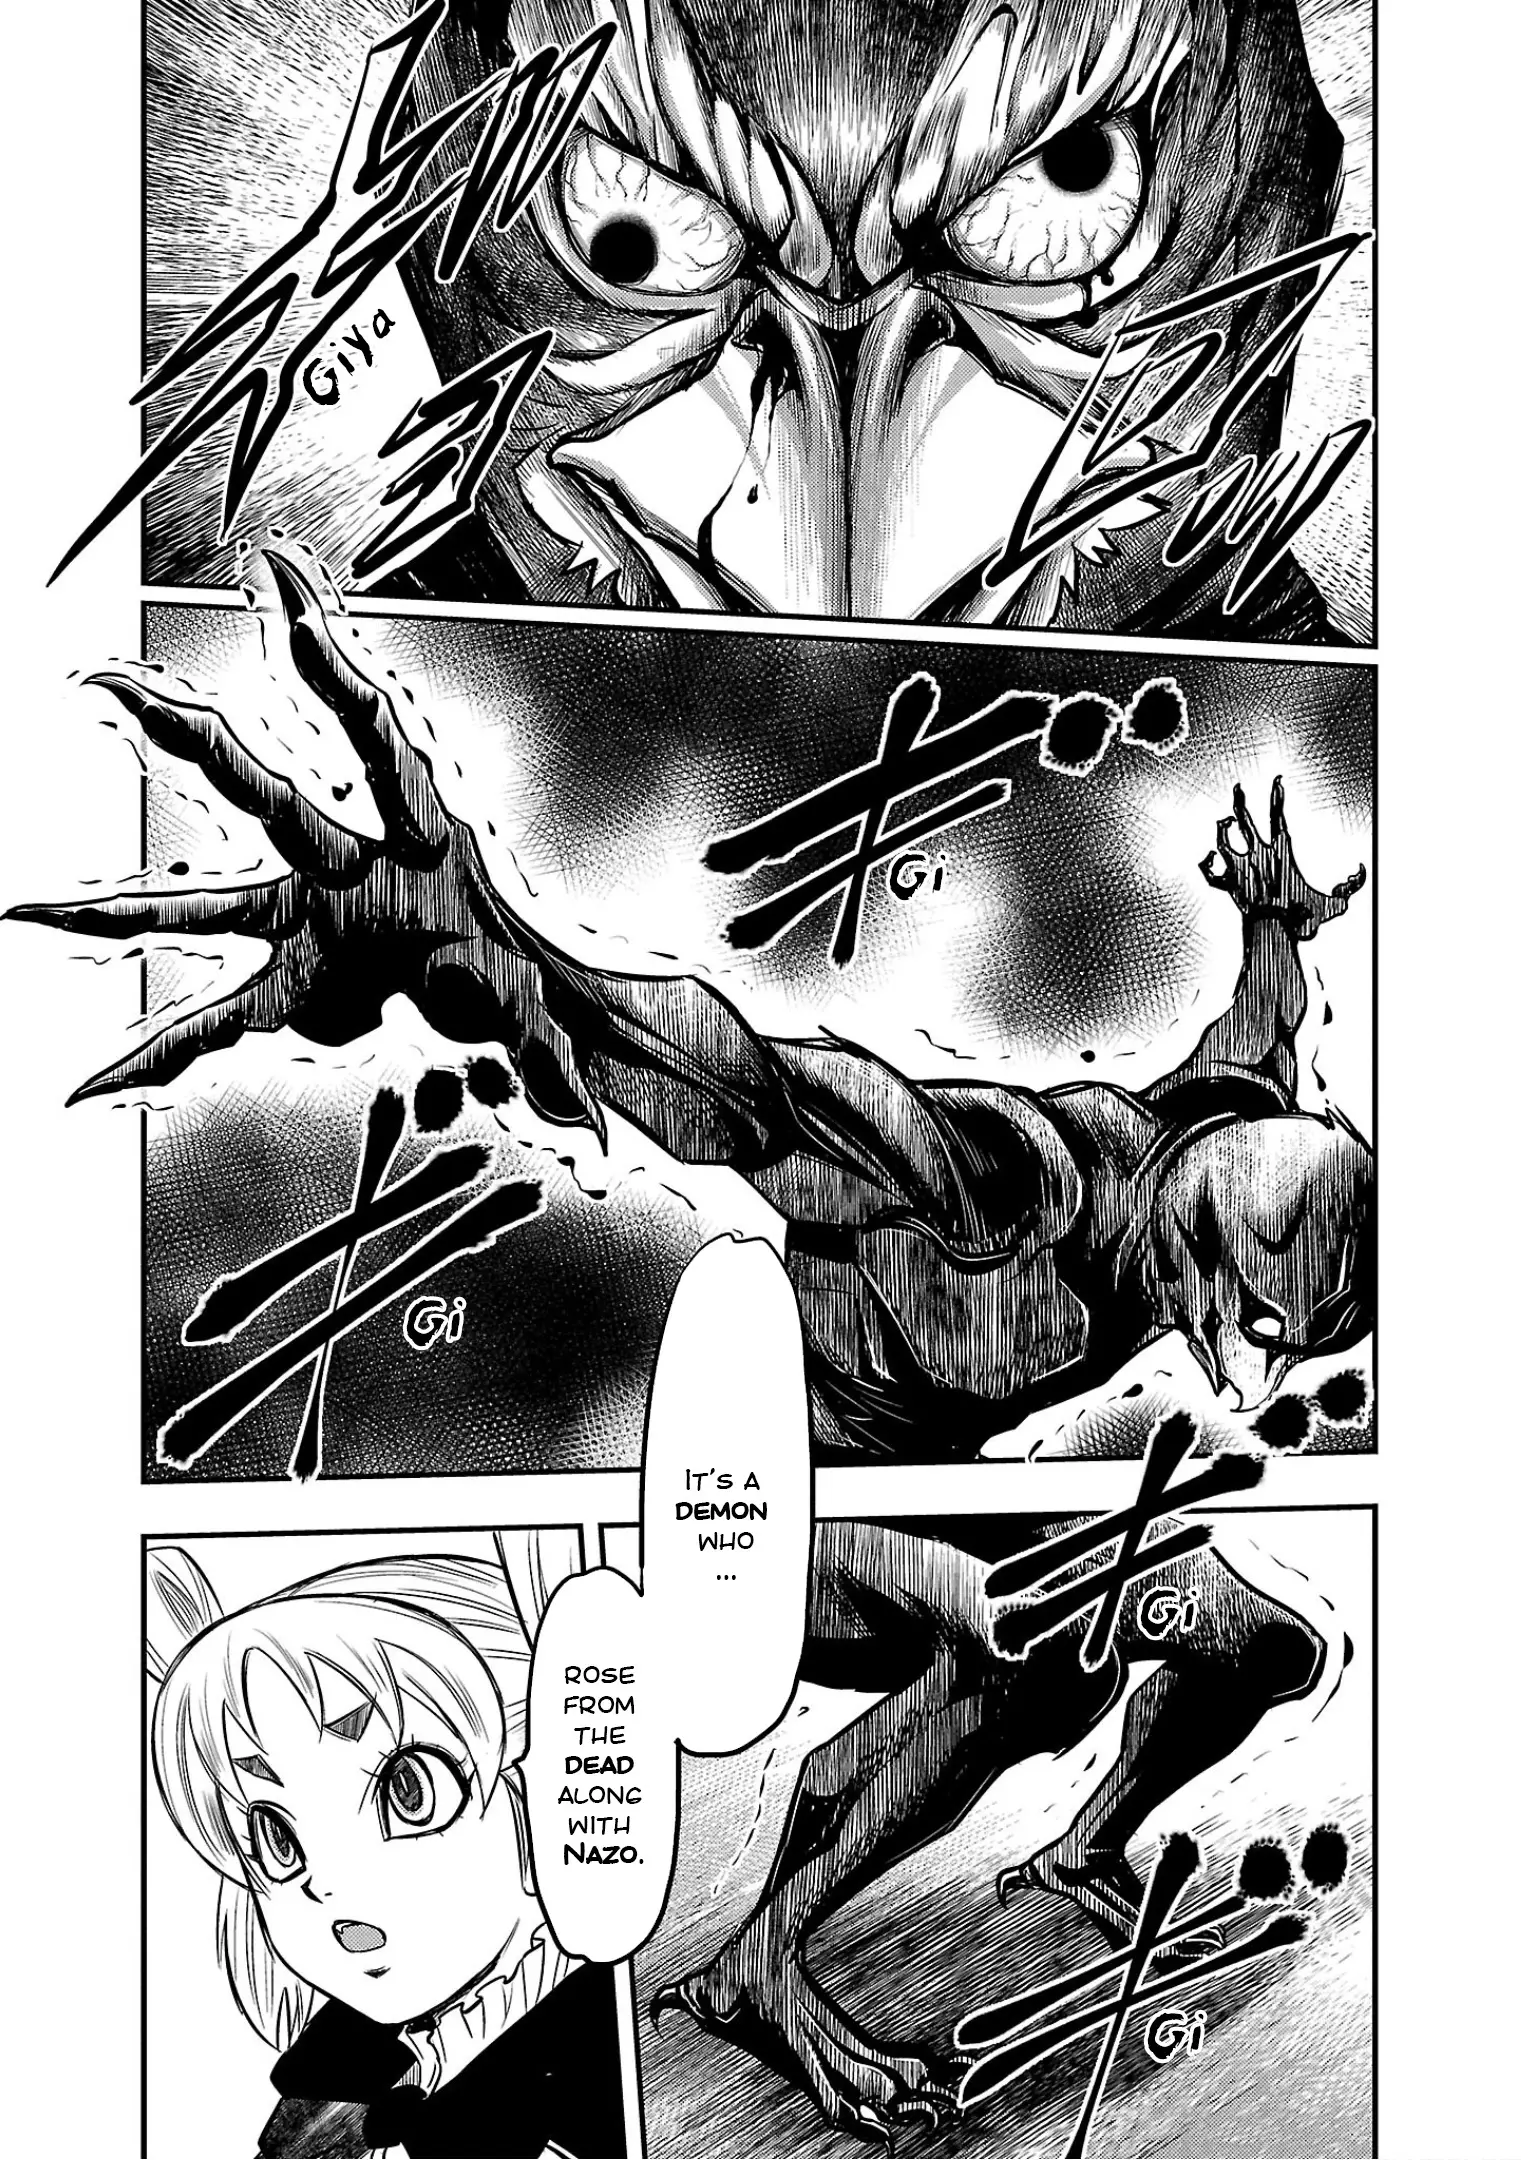 Golden Bat - A Mysterious Story Of The Taisho Era's Skull - 4 page 9-7c0e2c0a